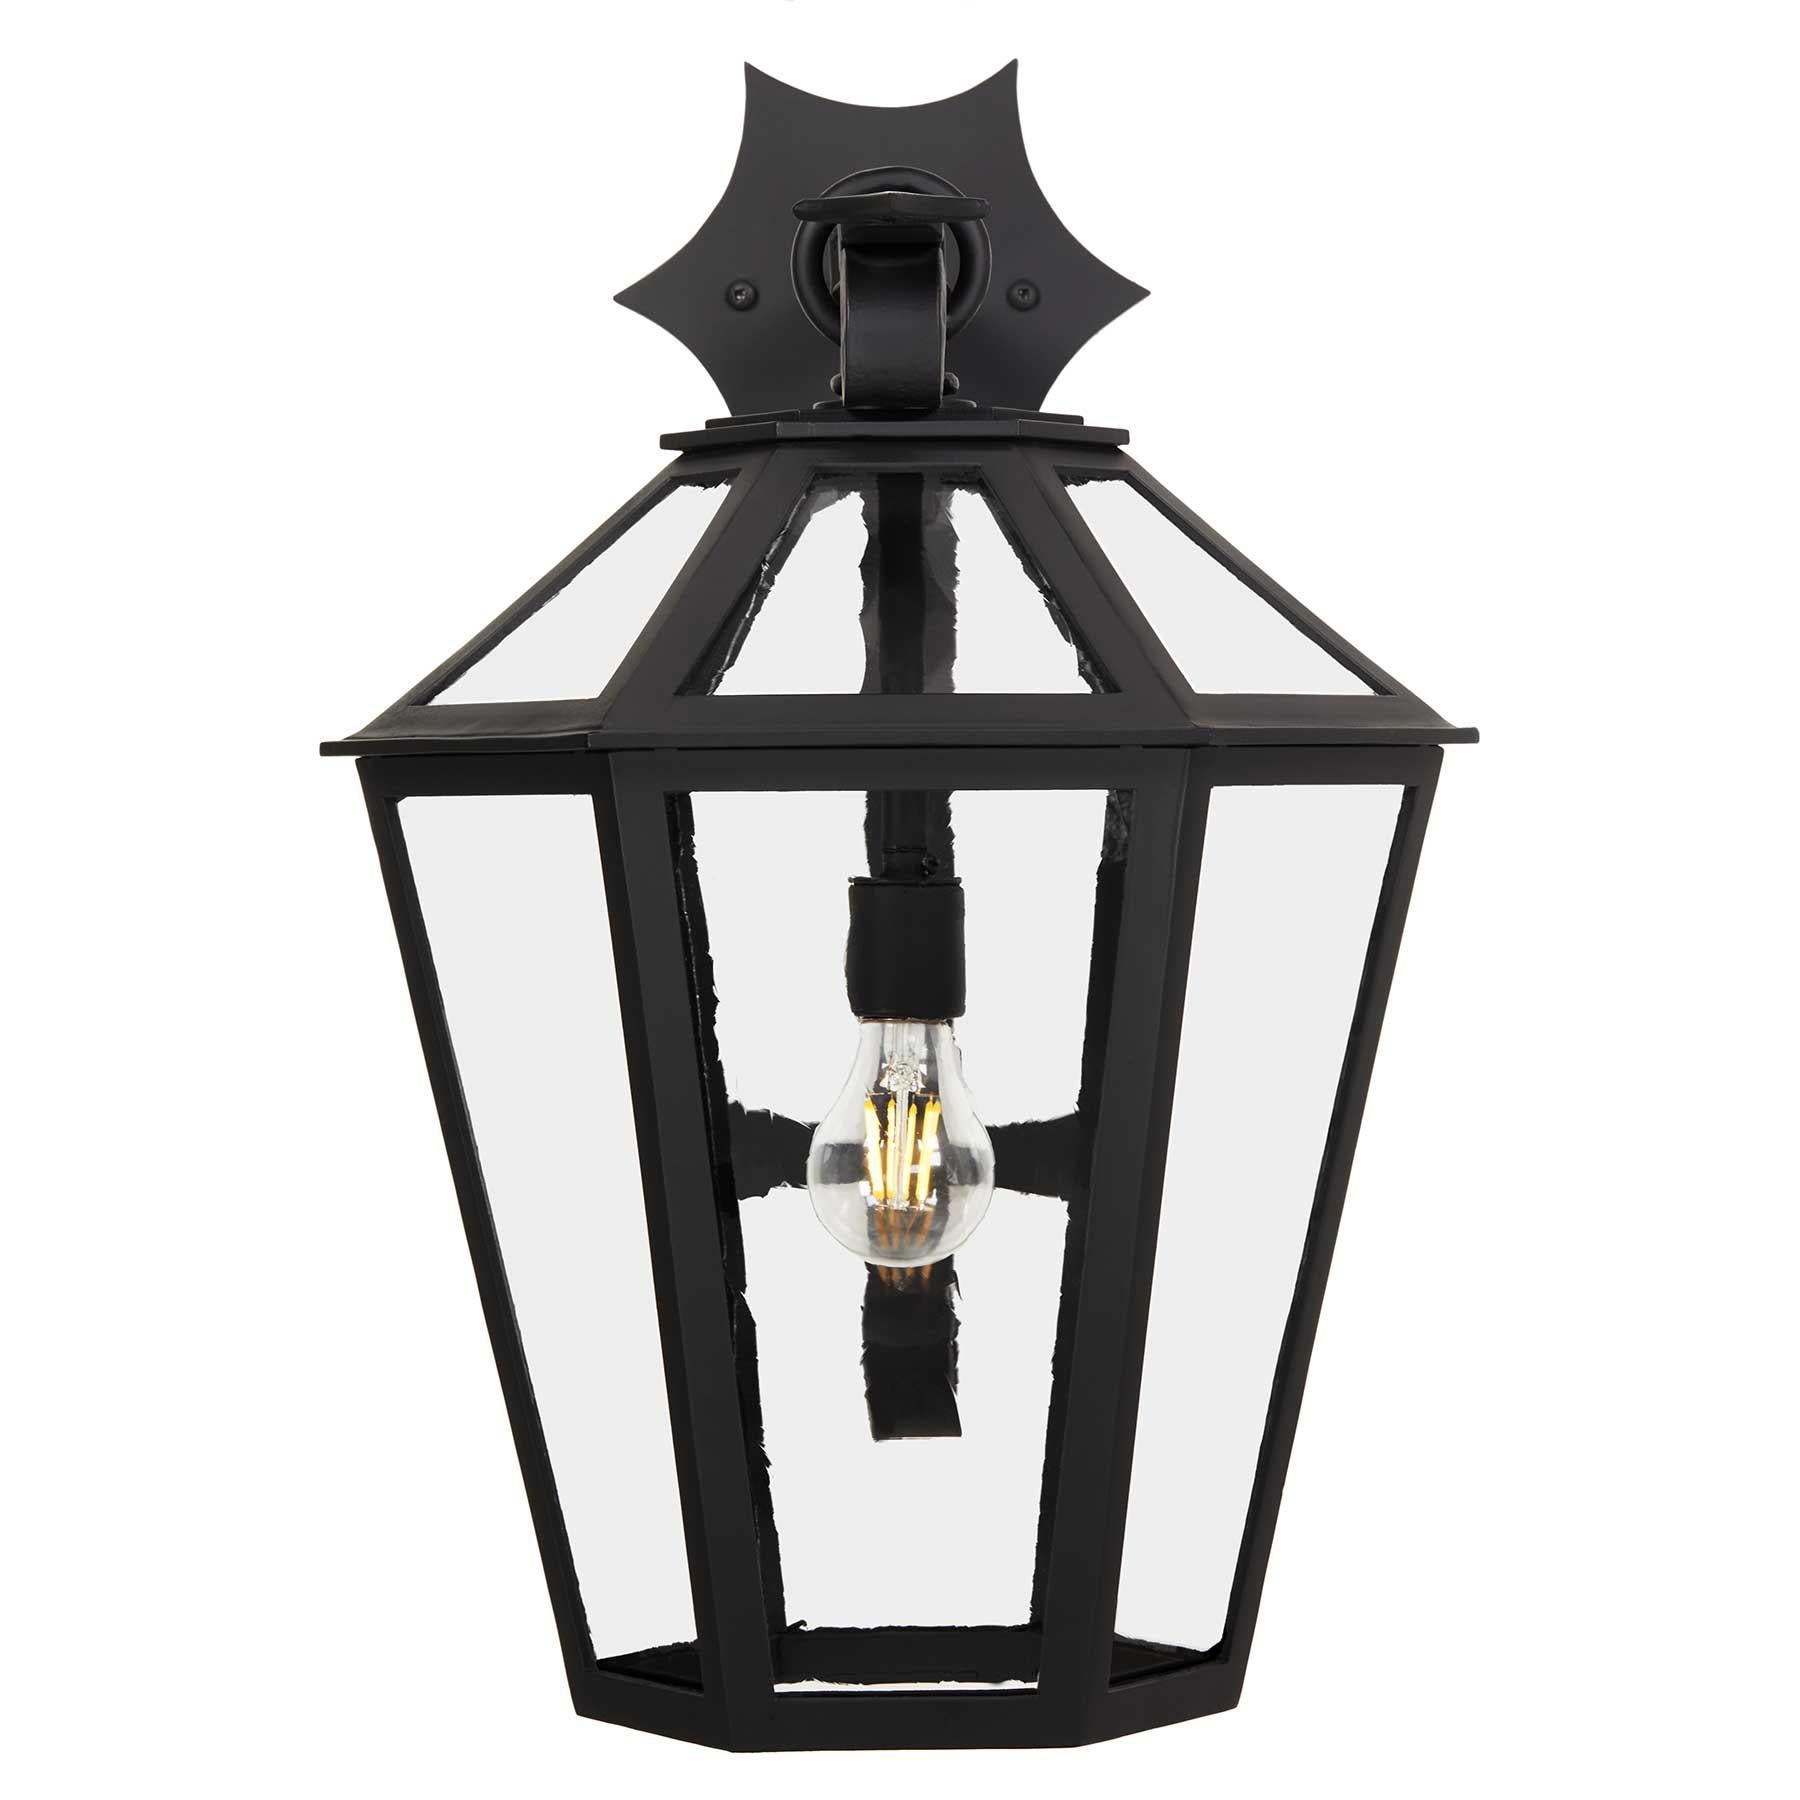 This Heirloom Quality Lantern designed by Architect Anthony Grumbine features a classic tapered form, dramatic curved arm and star detailing, this large hexagonal fixture is striking in numerous exterior, as well as interior, settings and